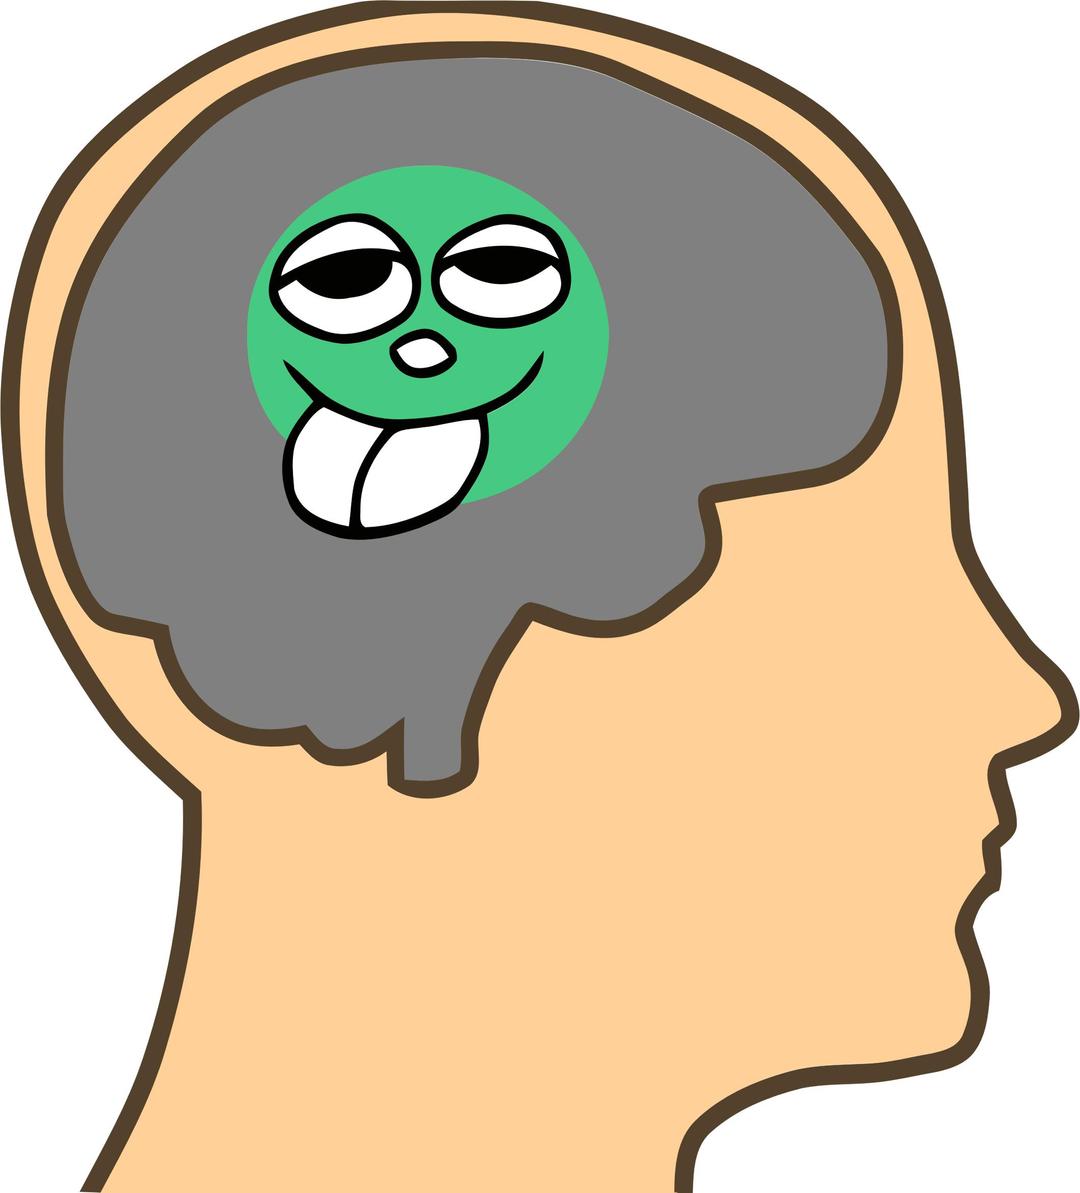 Pea Sized Brain (Fixed) png transparent